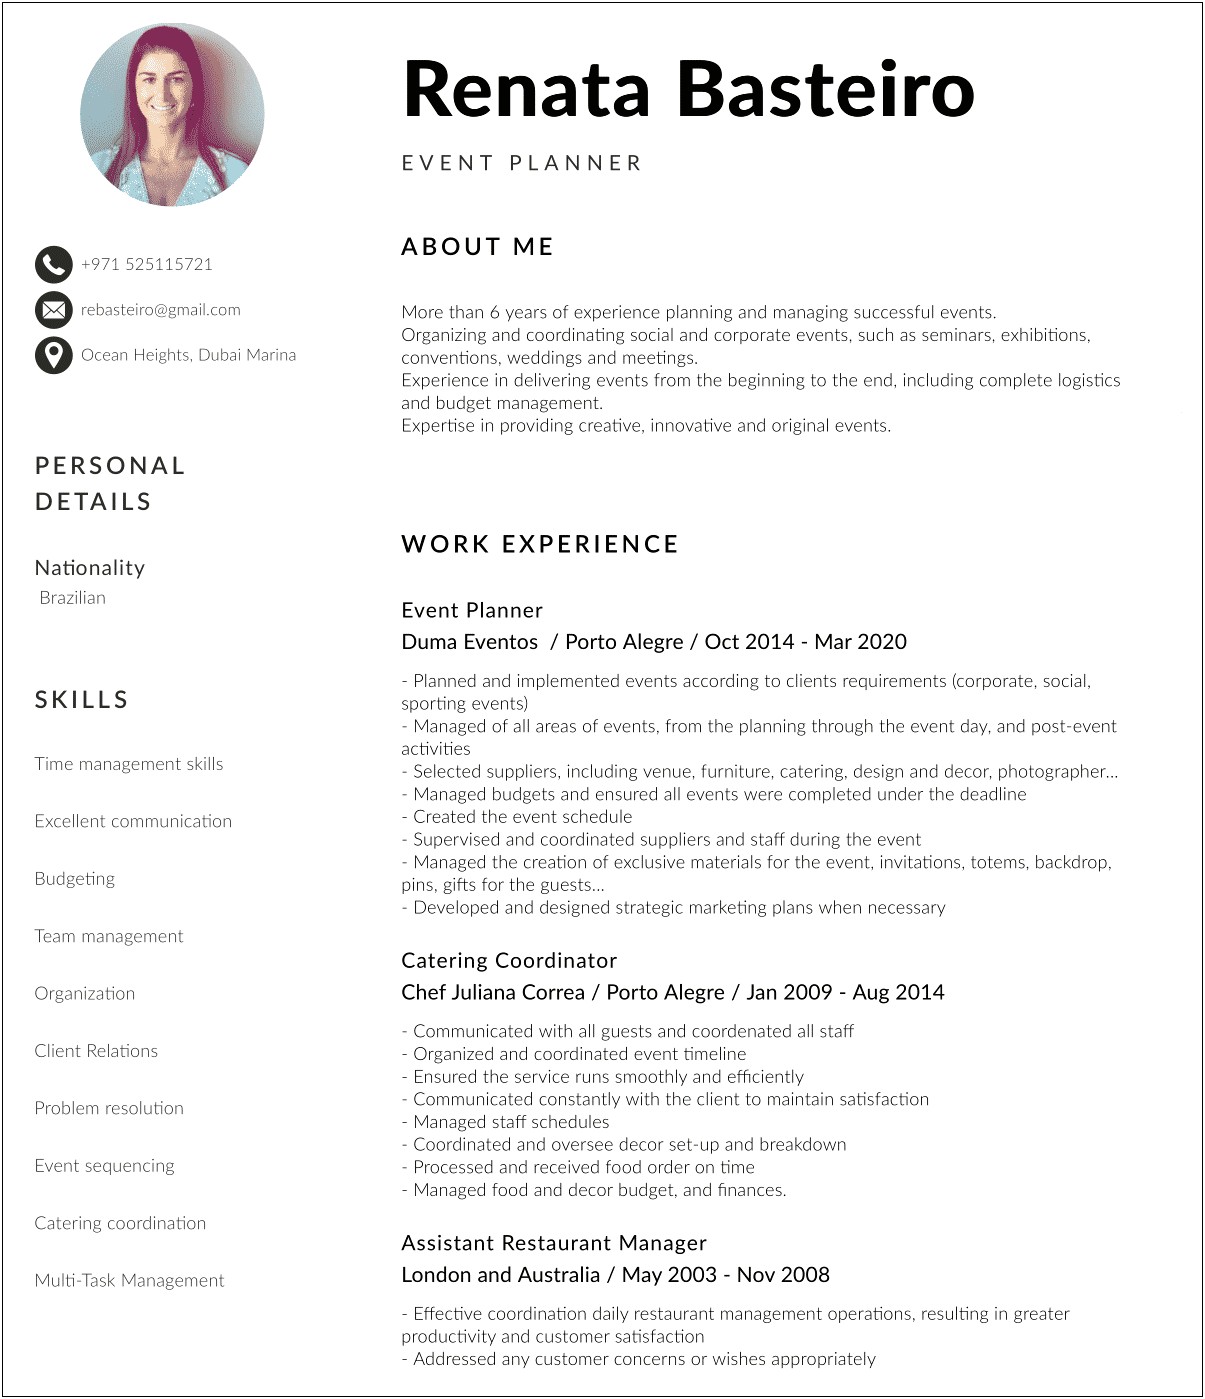 Sample Resume For Production Planning Manager